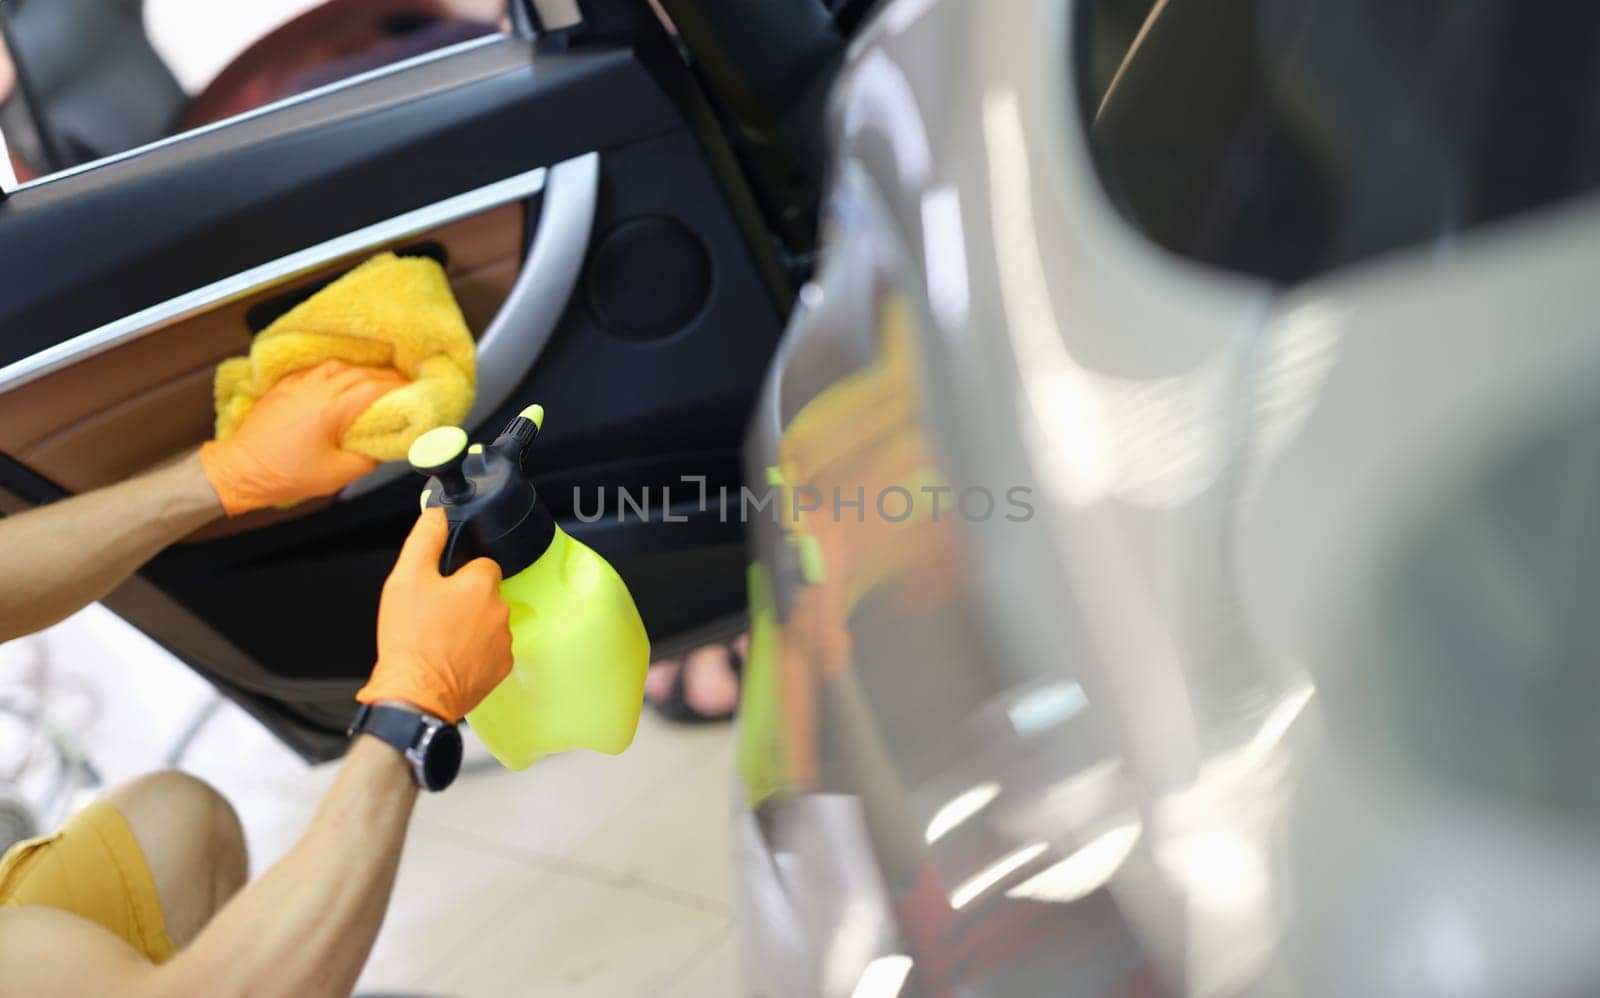 Professional dry cleaning of car interior and doors. Car interior dry cleaning concept